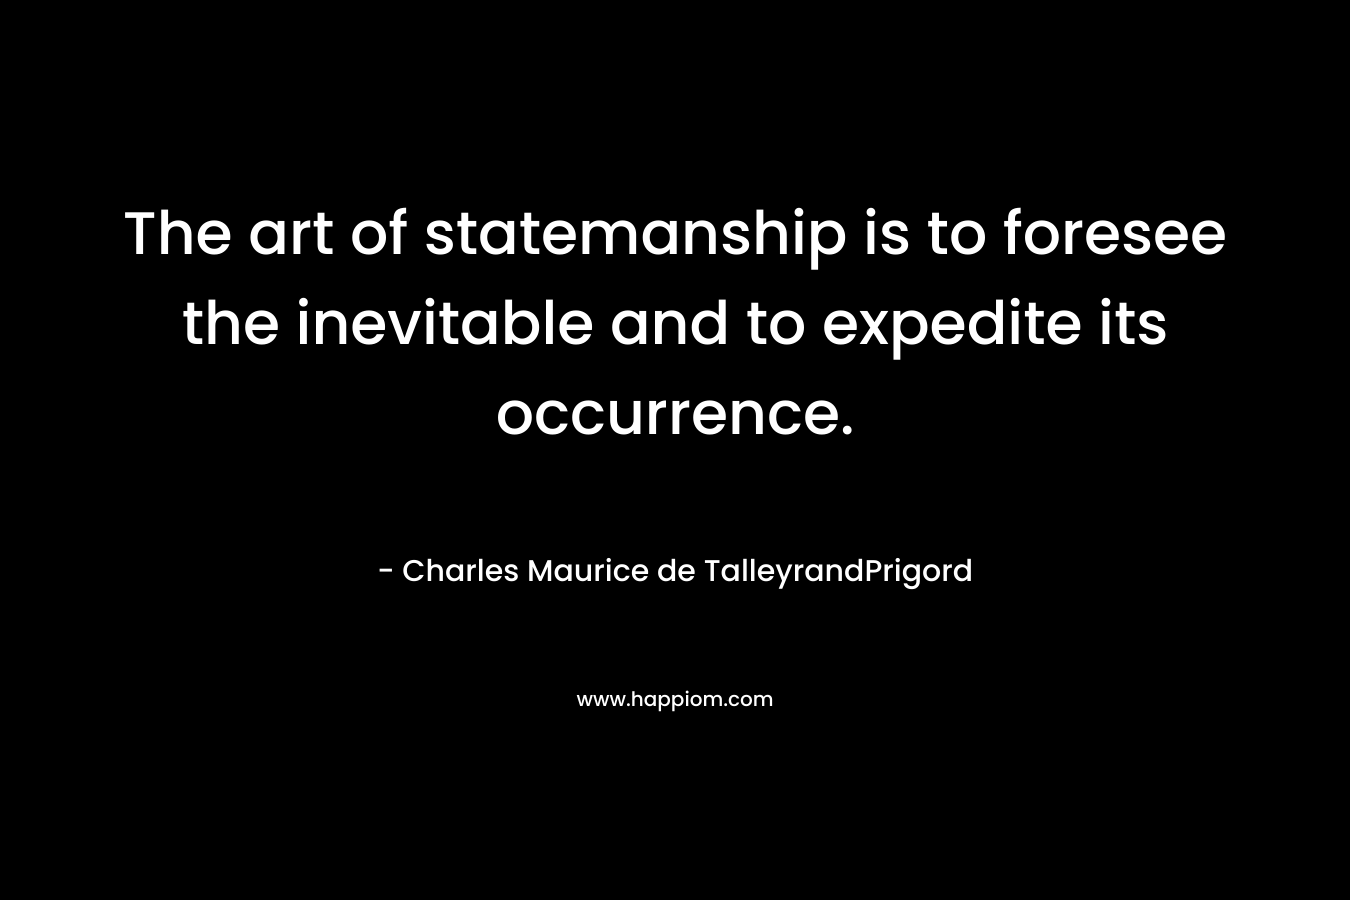 The art of statemanship is to foresee the inevitable and to expedite its occurrence. – Charles Maurice de TalleyrandPrigord